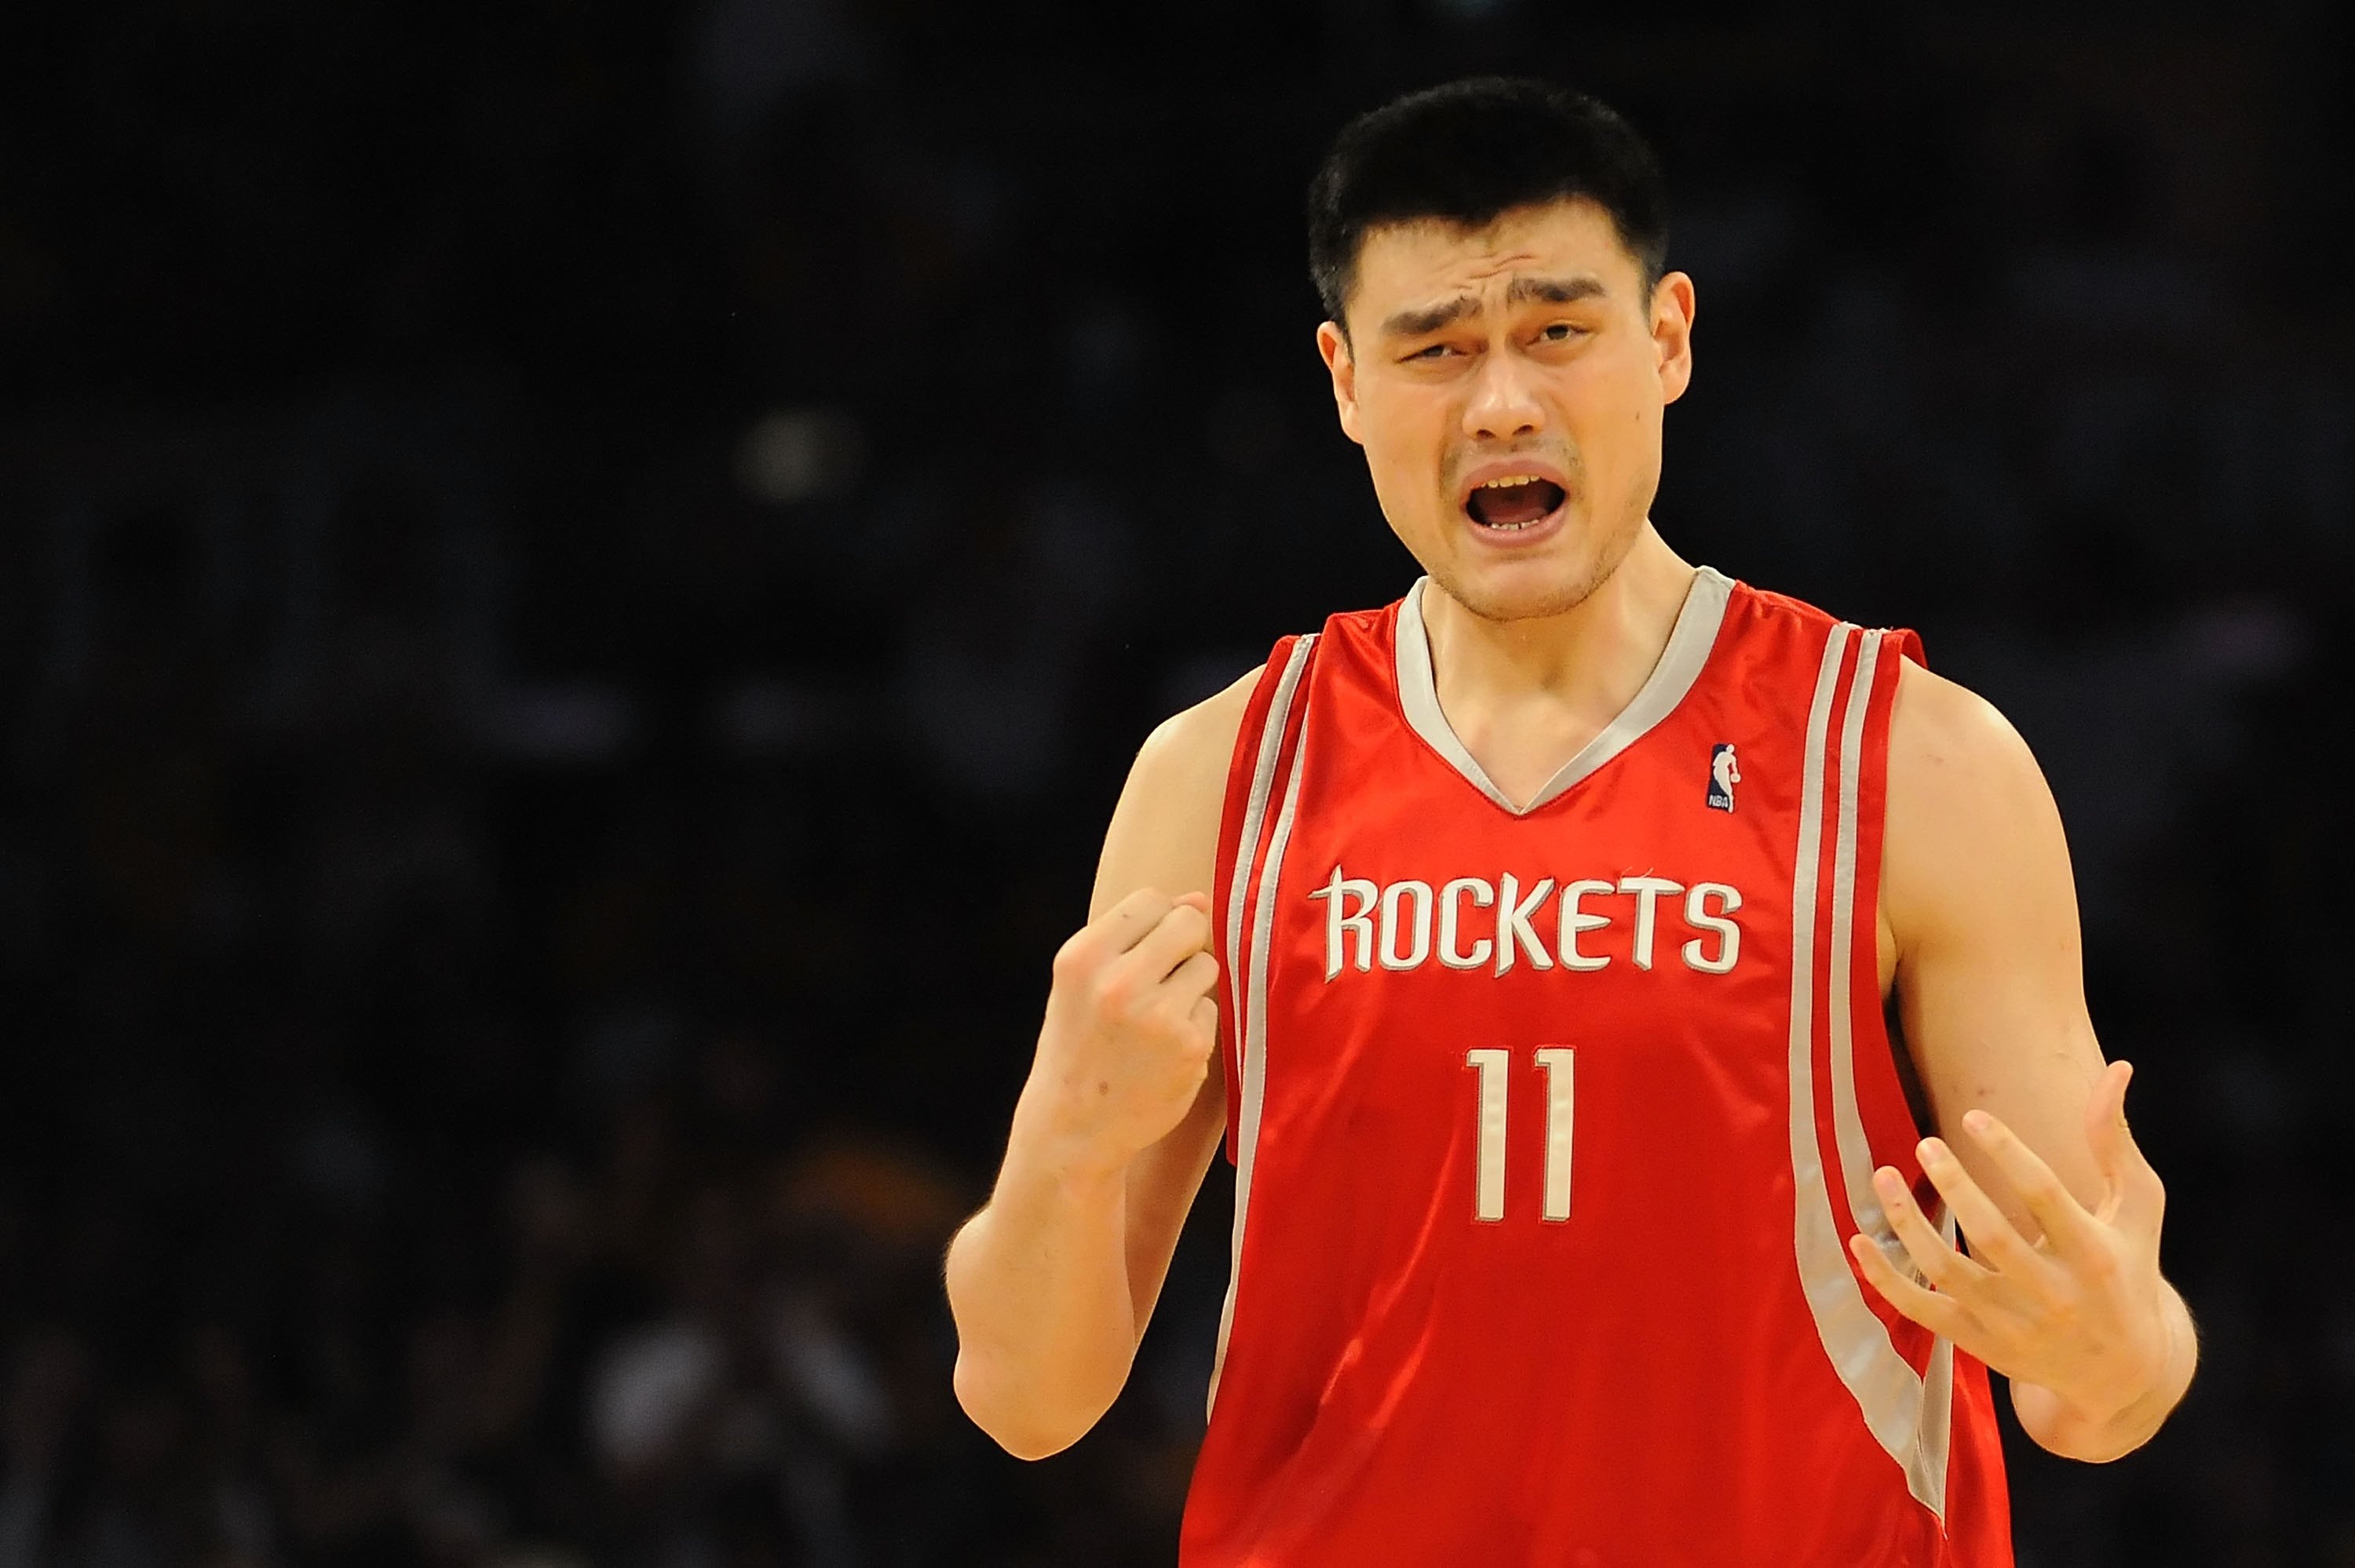 Rockets' Yao Ming carries Asians in America to new heights